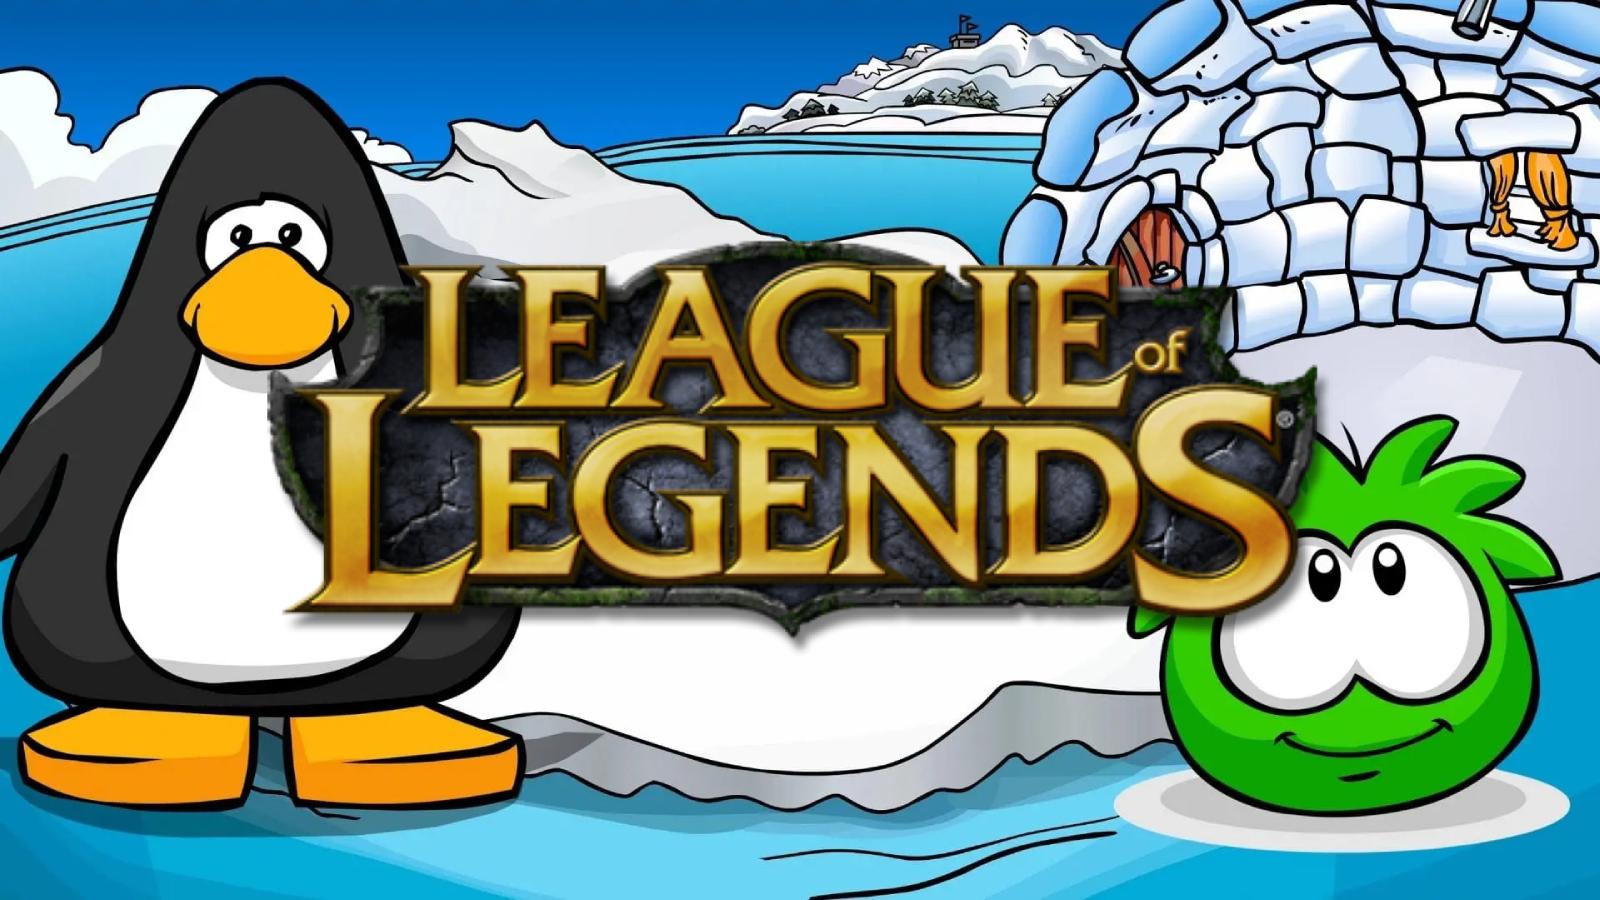 Club Penguin with LoL logo over it